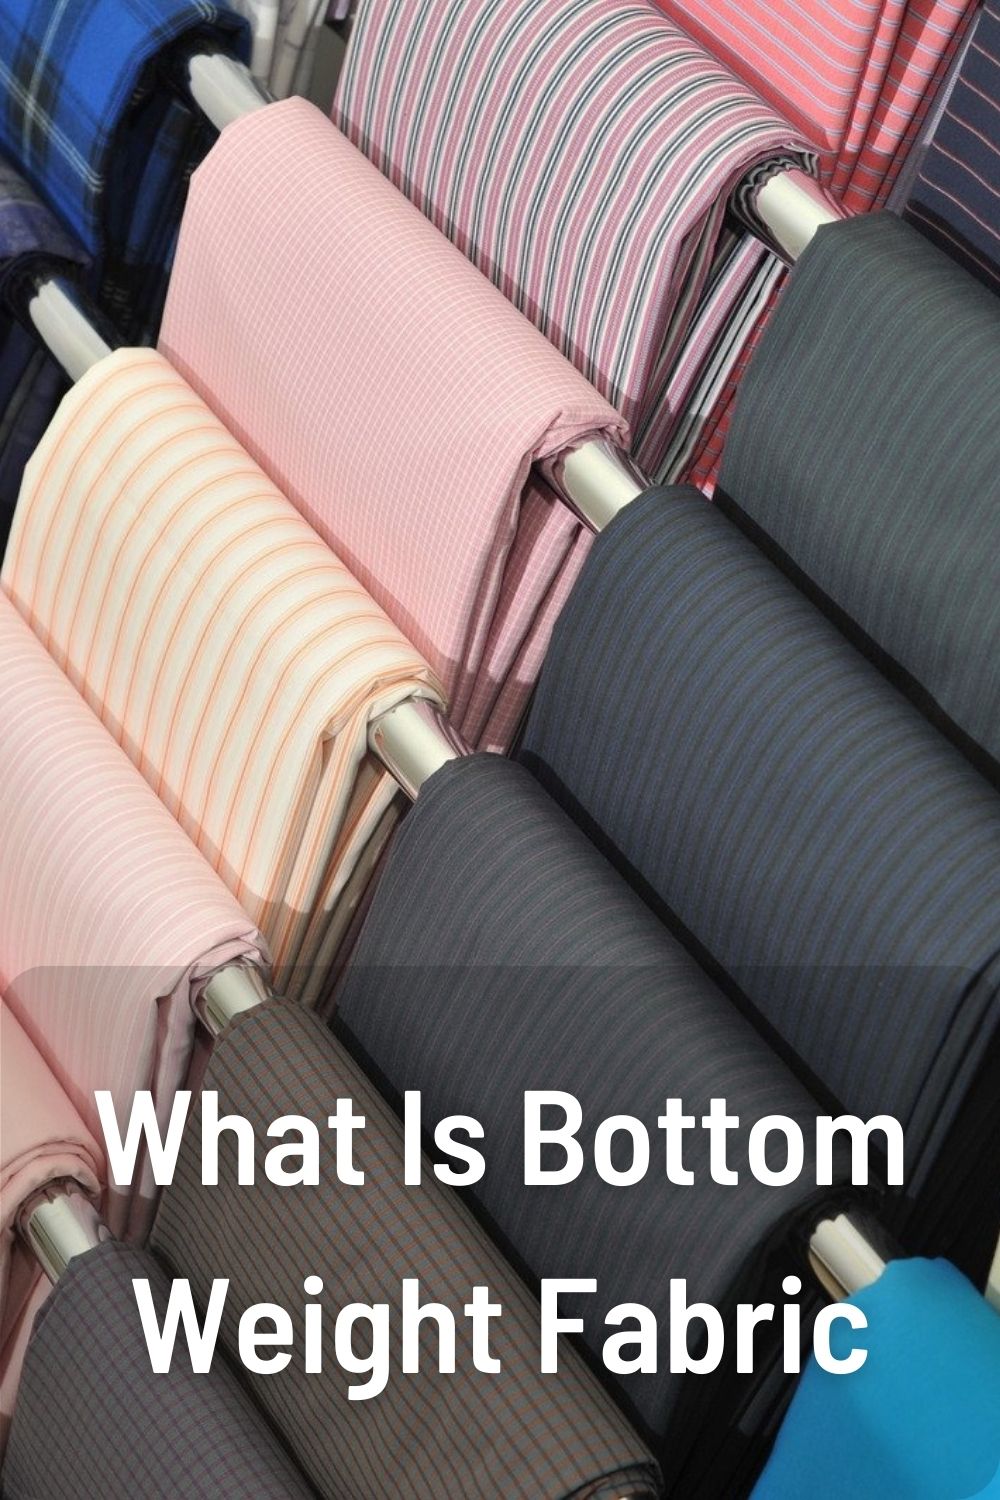 What Is Bottom Weight Fabric